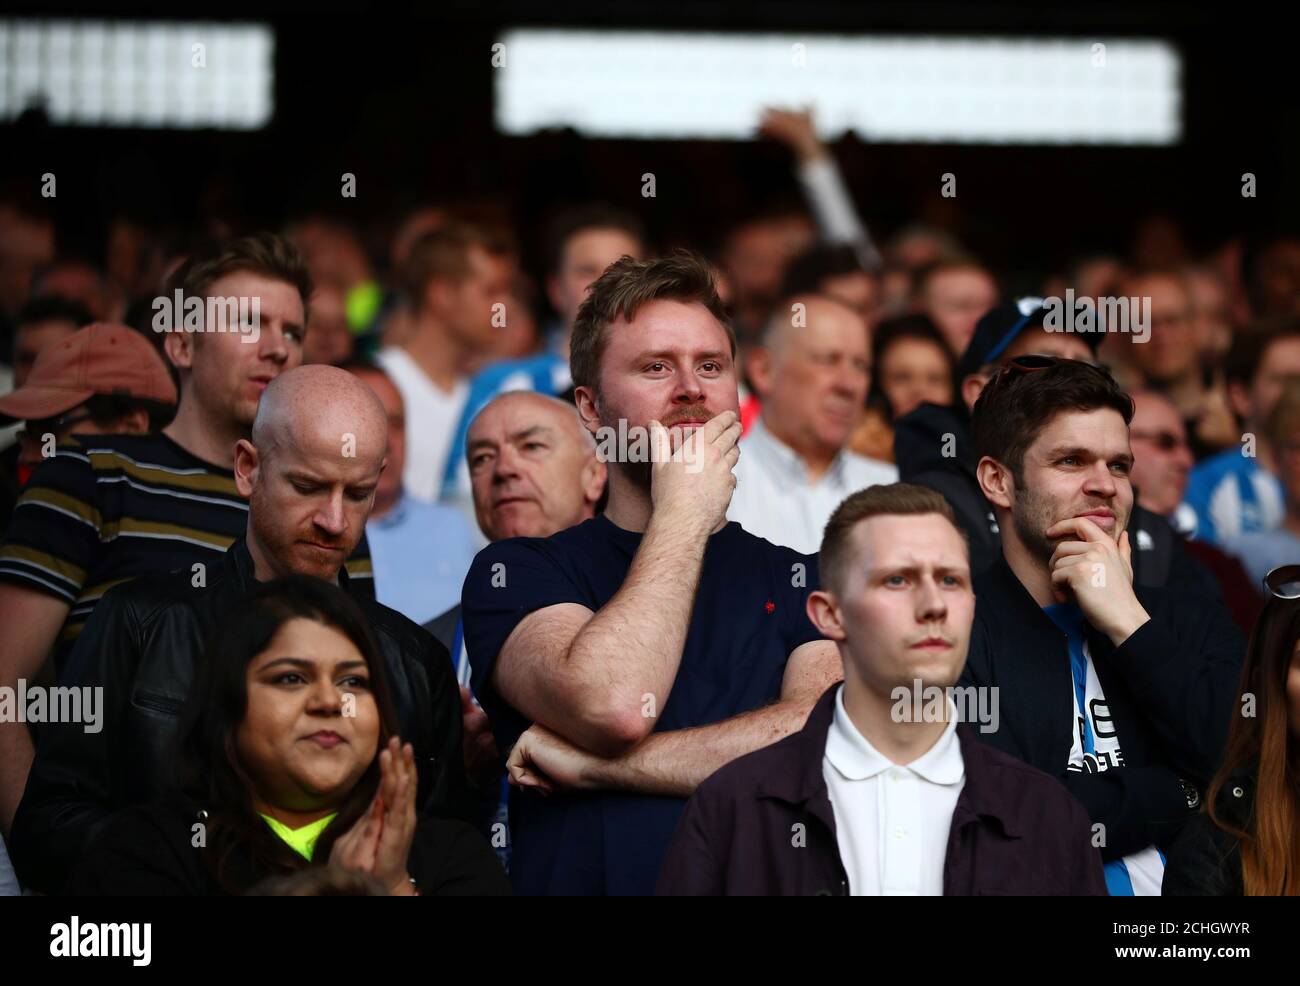 Soccer Football - Premier League - Crystal Palace v Huddersfield Town - Selhurst Park, London, Britain - March 30, 2019  Huddersfield Town fans look on during the match      REUTERS/Hannah McKay  EDITORIAL USE ONLY. No use with unauthorized audio, video, data, fixture lists, club/league logos or 'live' services. Online in-match use limited to 75 images, no video emulation. No use in betting, games or single club/league/player publications.  Please contact your account representative for further details. Stock Photo